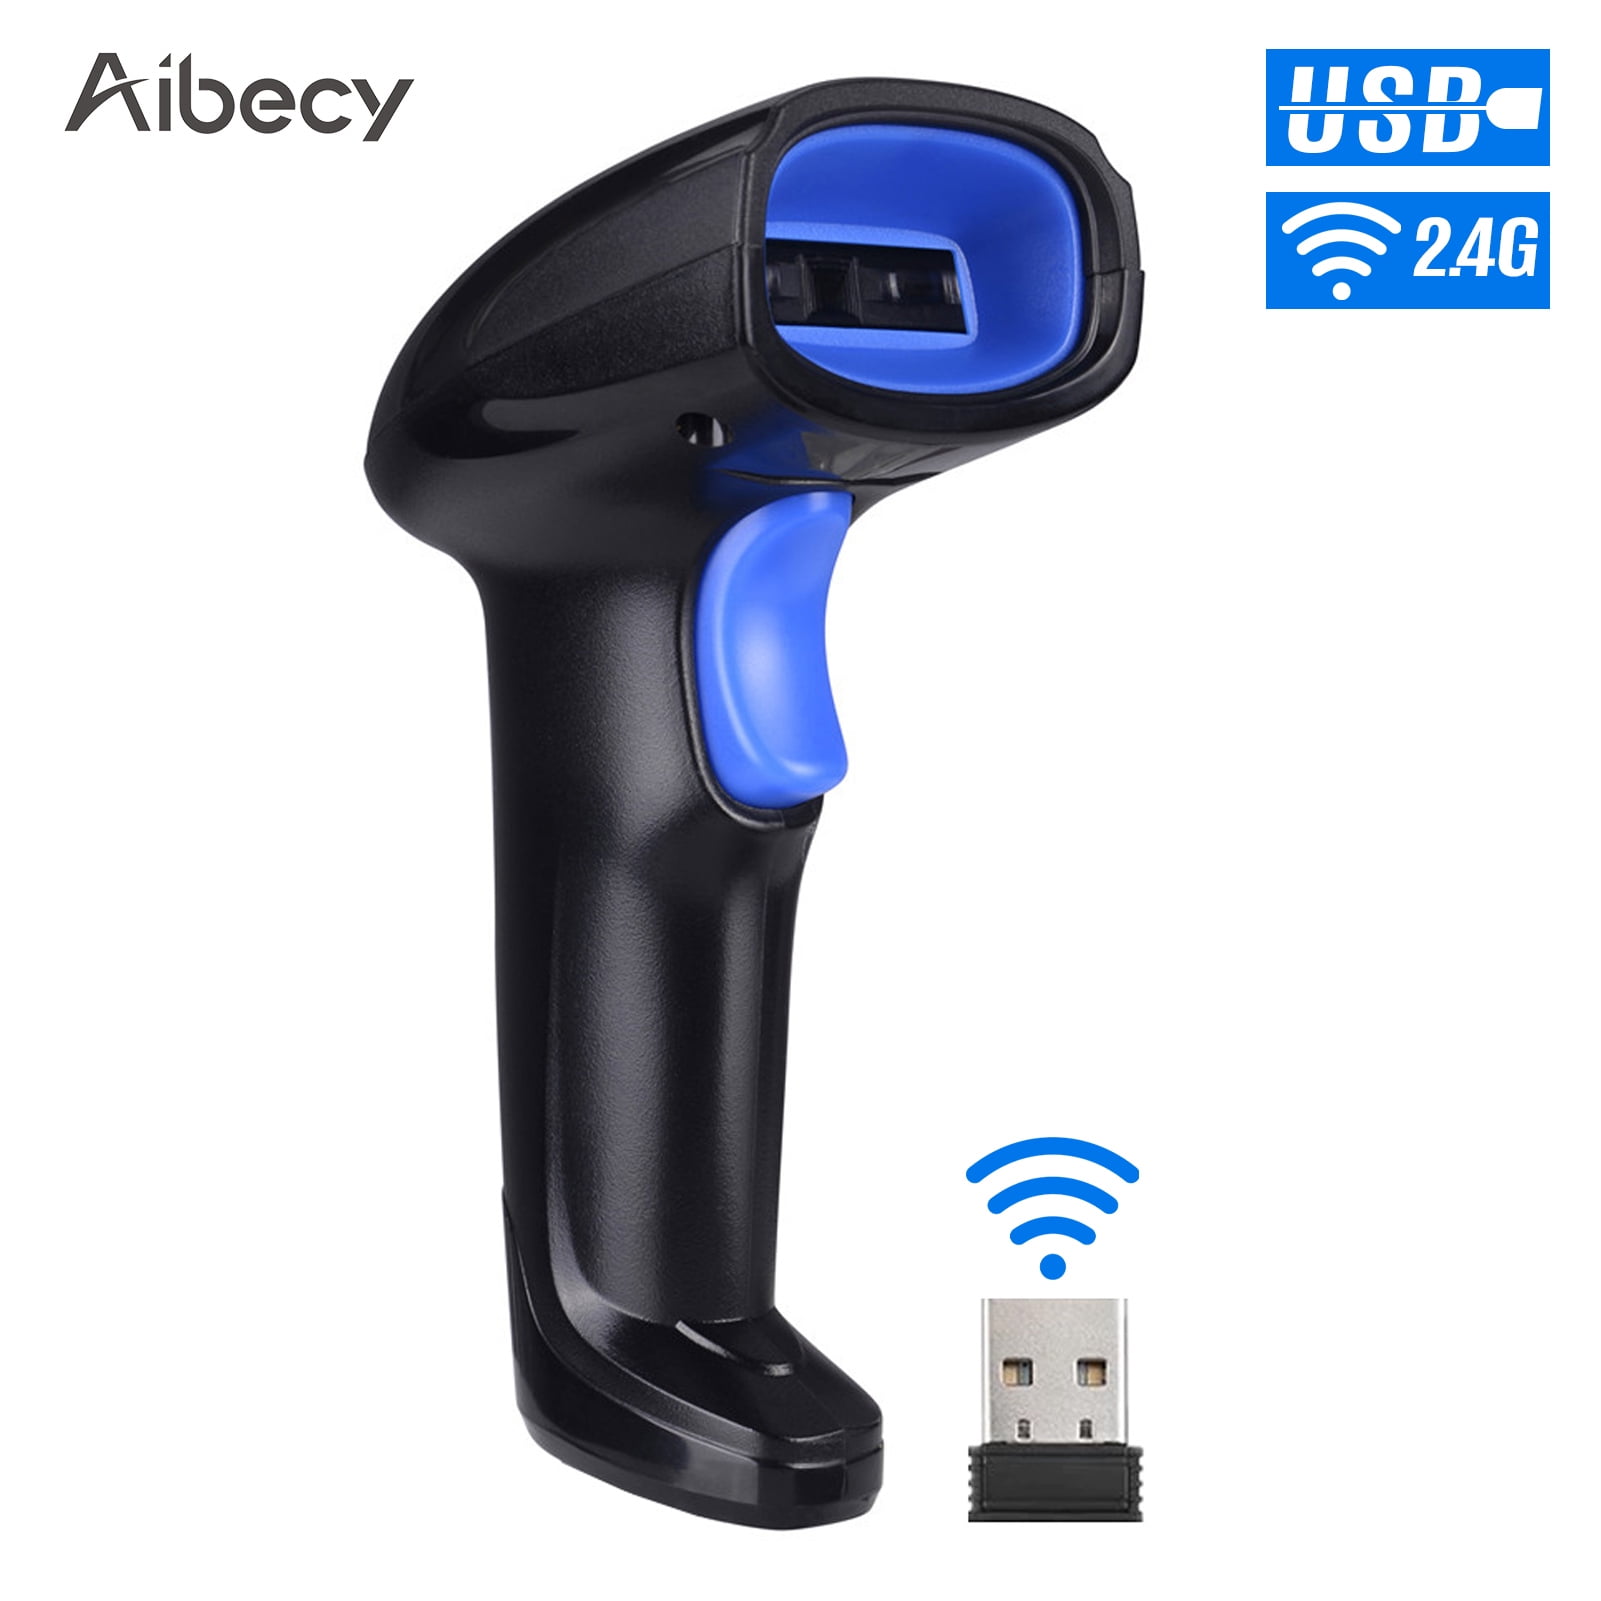 Barcode Scanner USB Wired Black with Stand Handheld Sensing and Intelligent Scan Bar Code Scan Automatic for POS System NVLFHY 